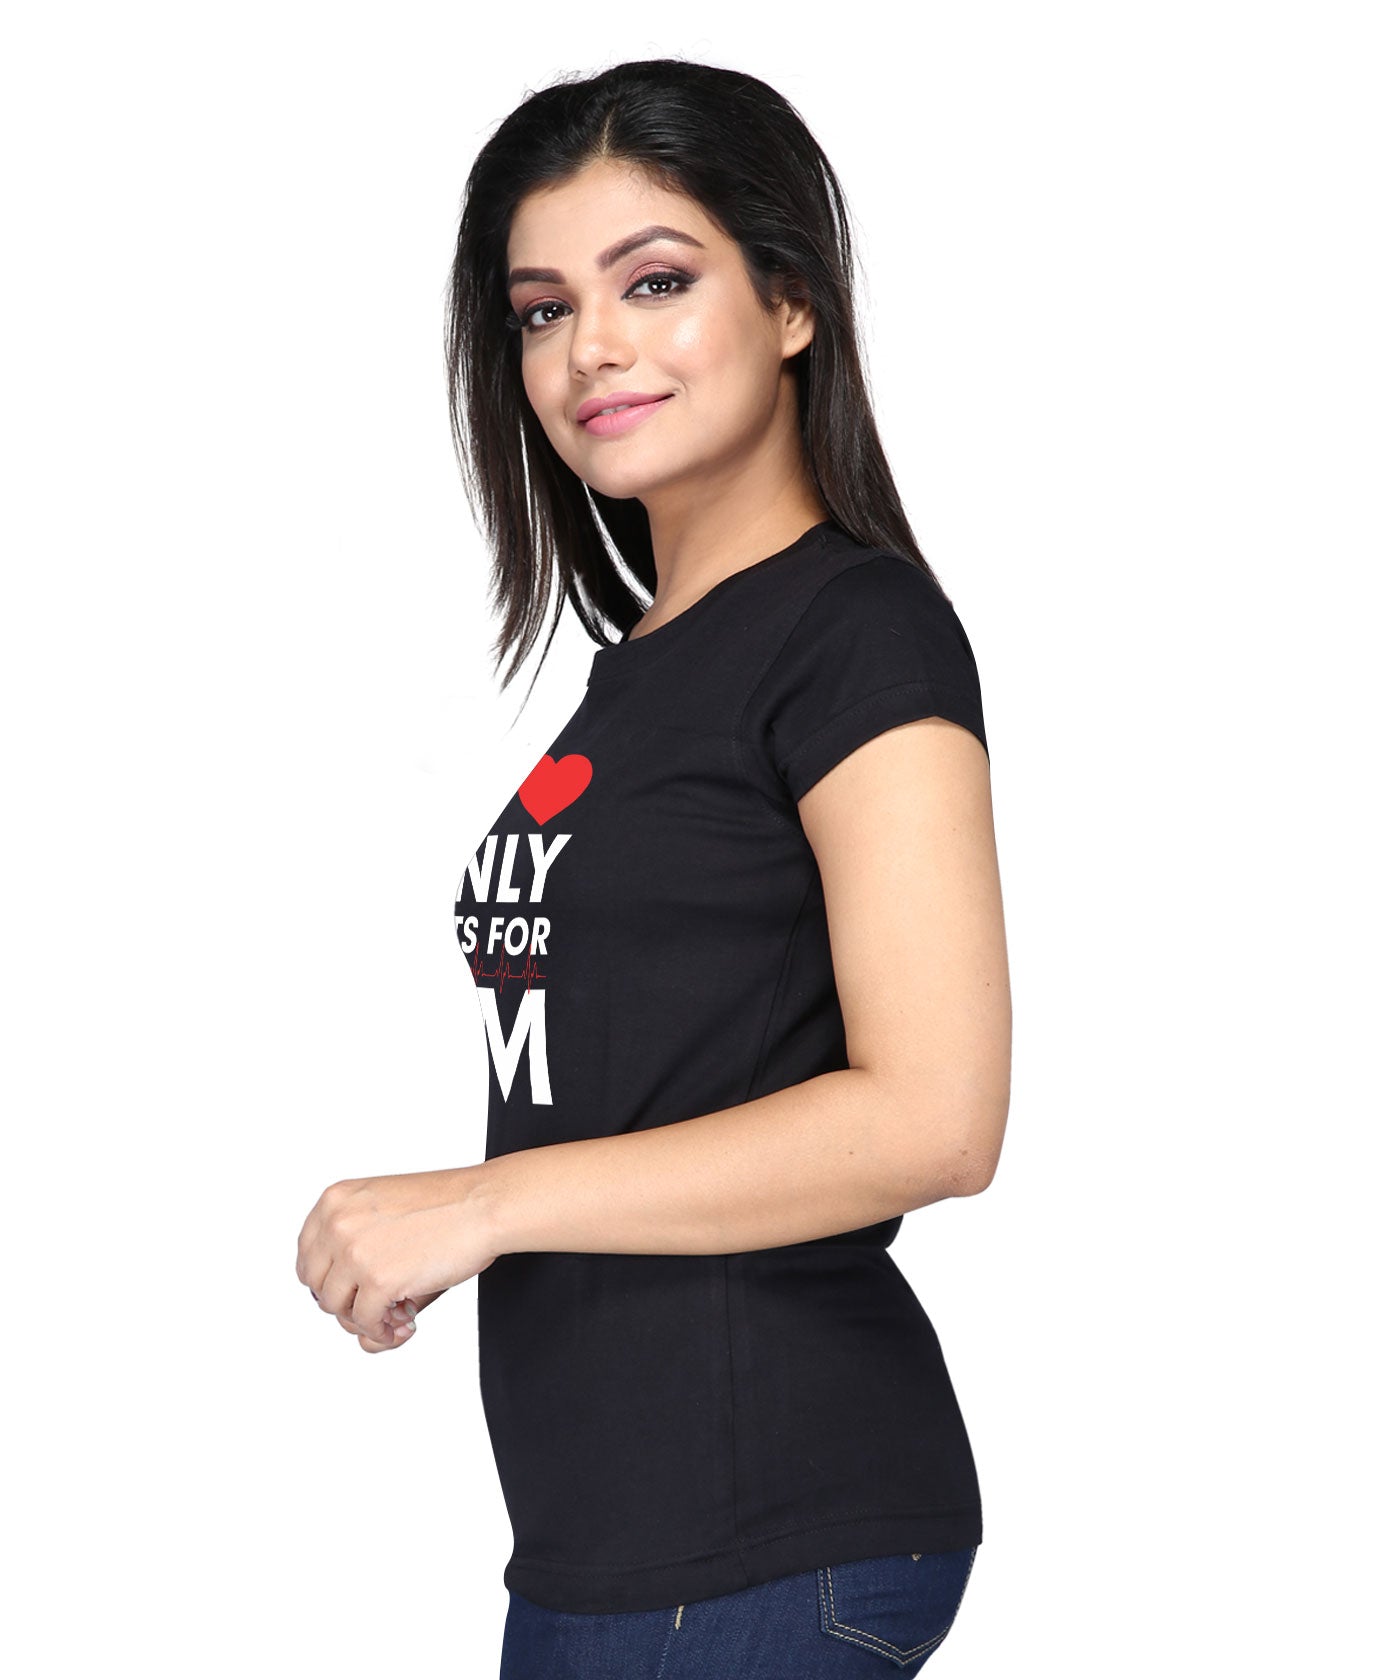 My Love Only beats for HIM - Premium Round Neck Cotton Tees for Women - Black